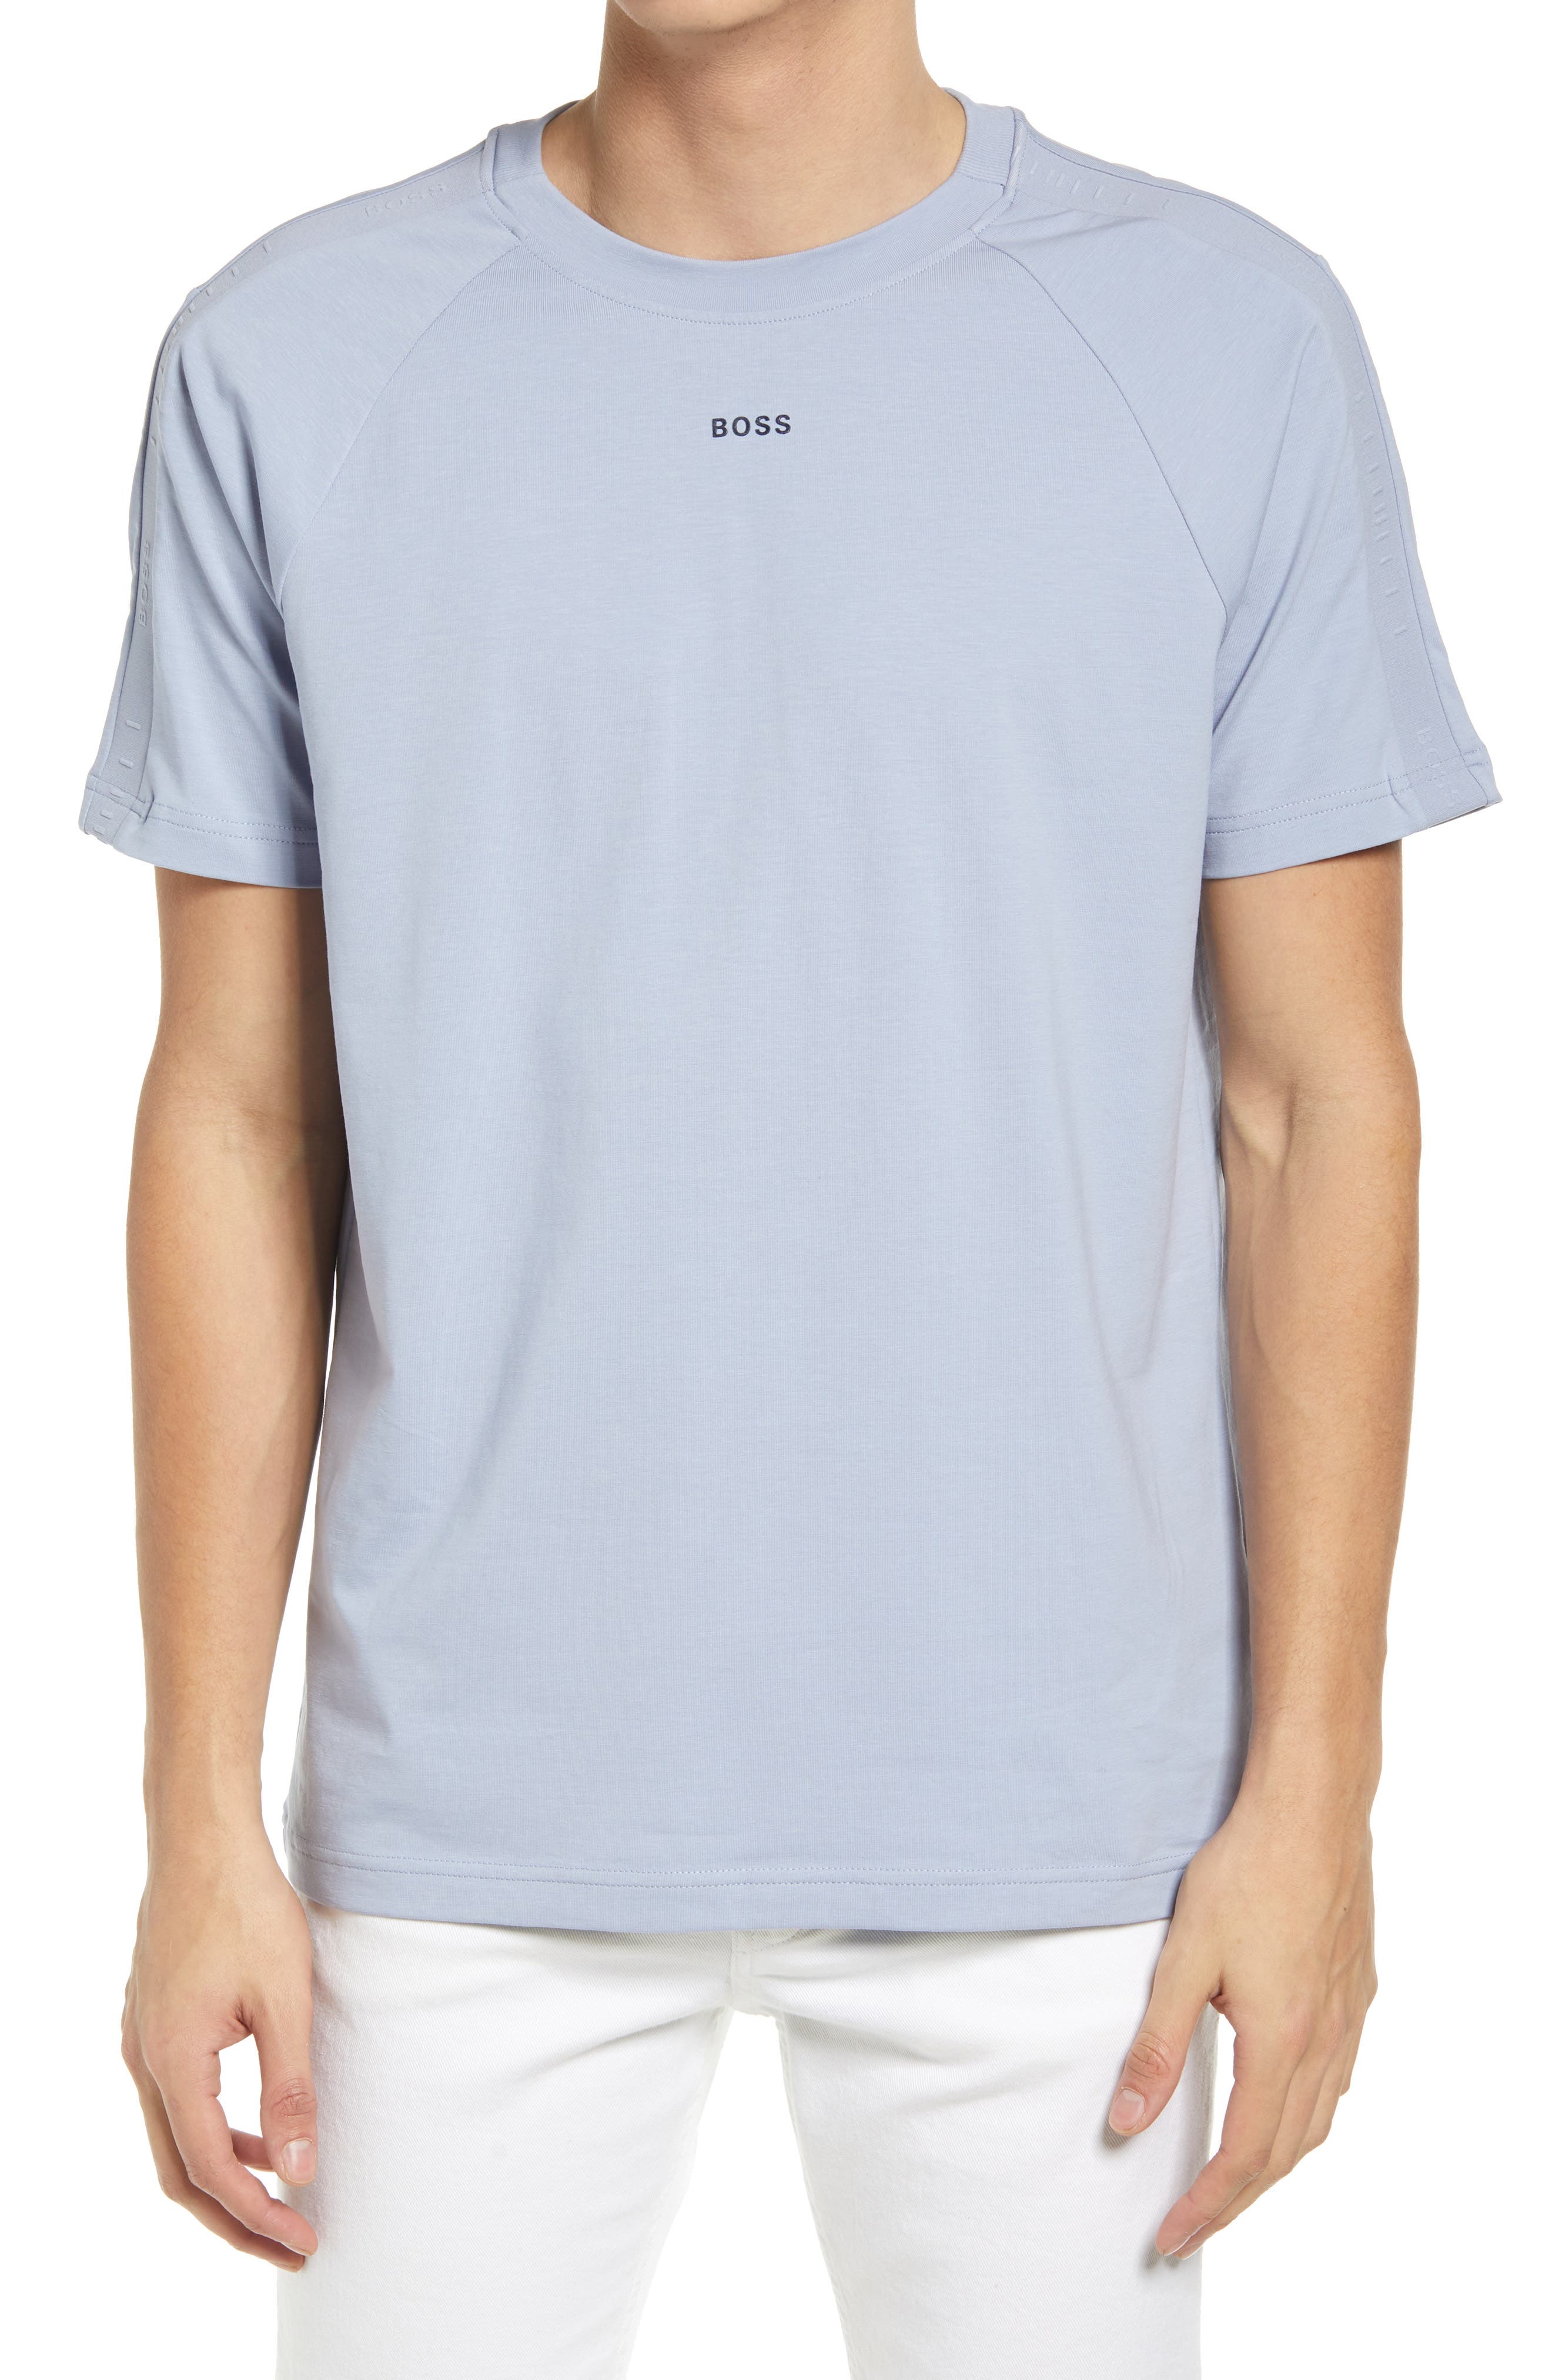 HUGO Tee Tape Raglan T-Shirt in Open Blue at Nordstrom, Size X-Large